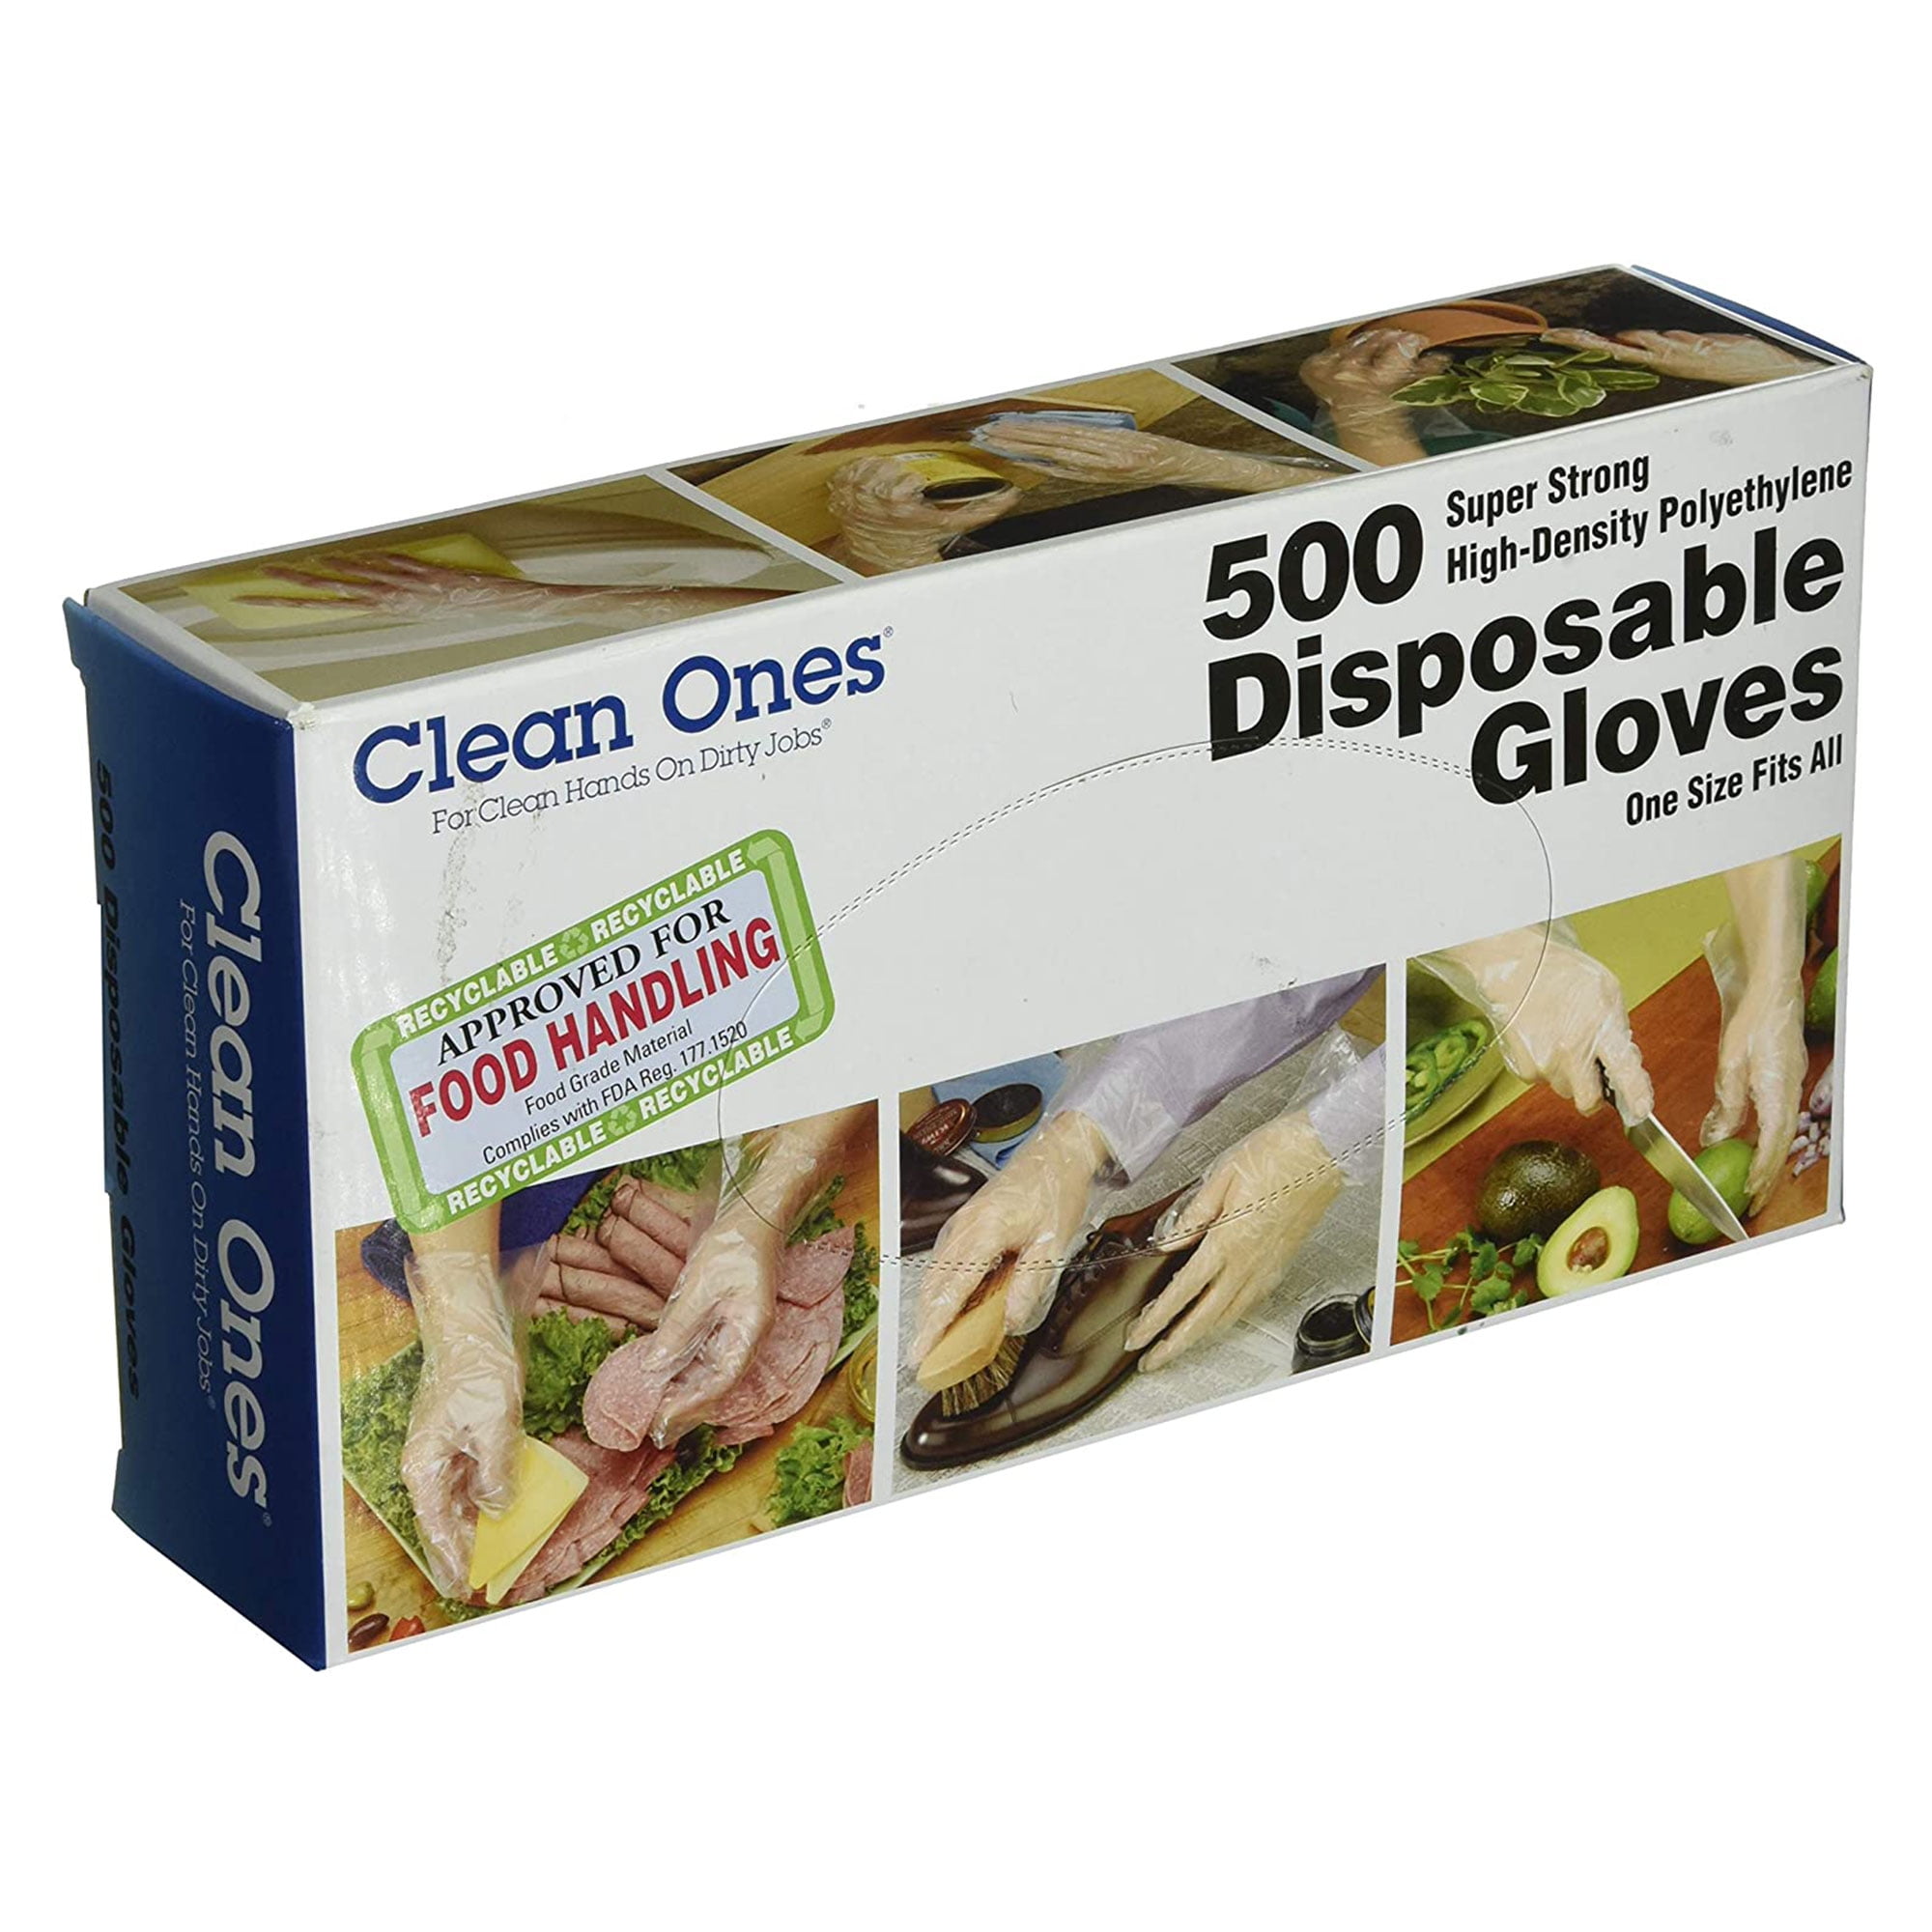 Clean Ones 500 Count Latex Free Disposable Food Gloves, One Size (2 Pack)